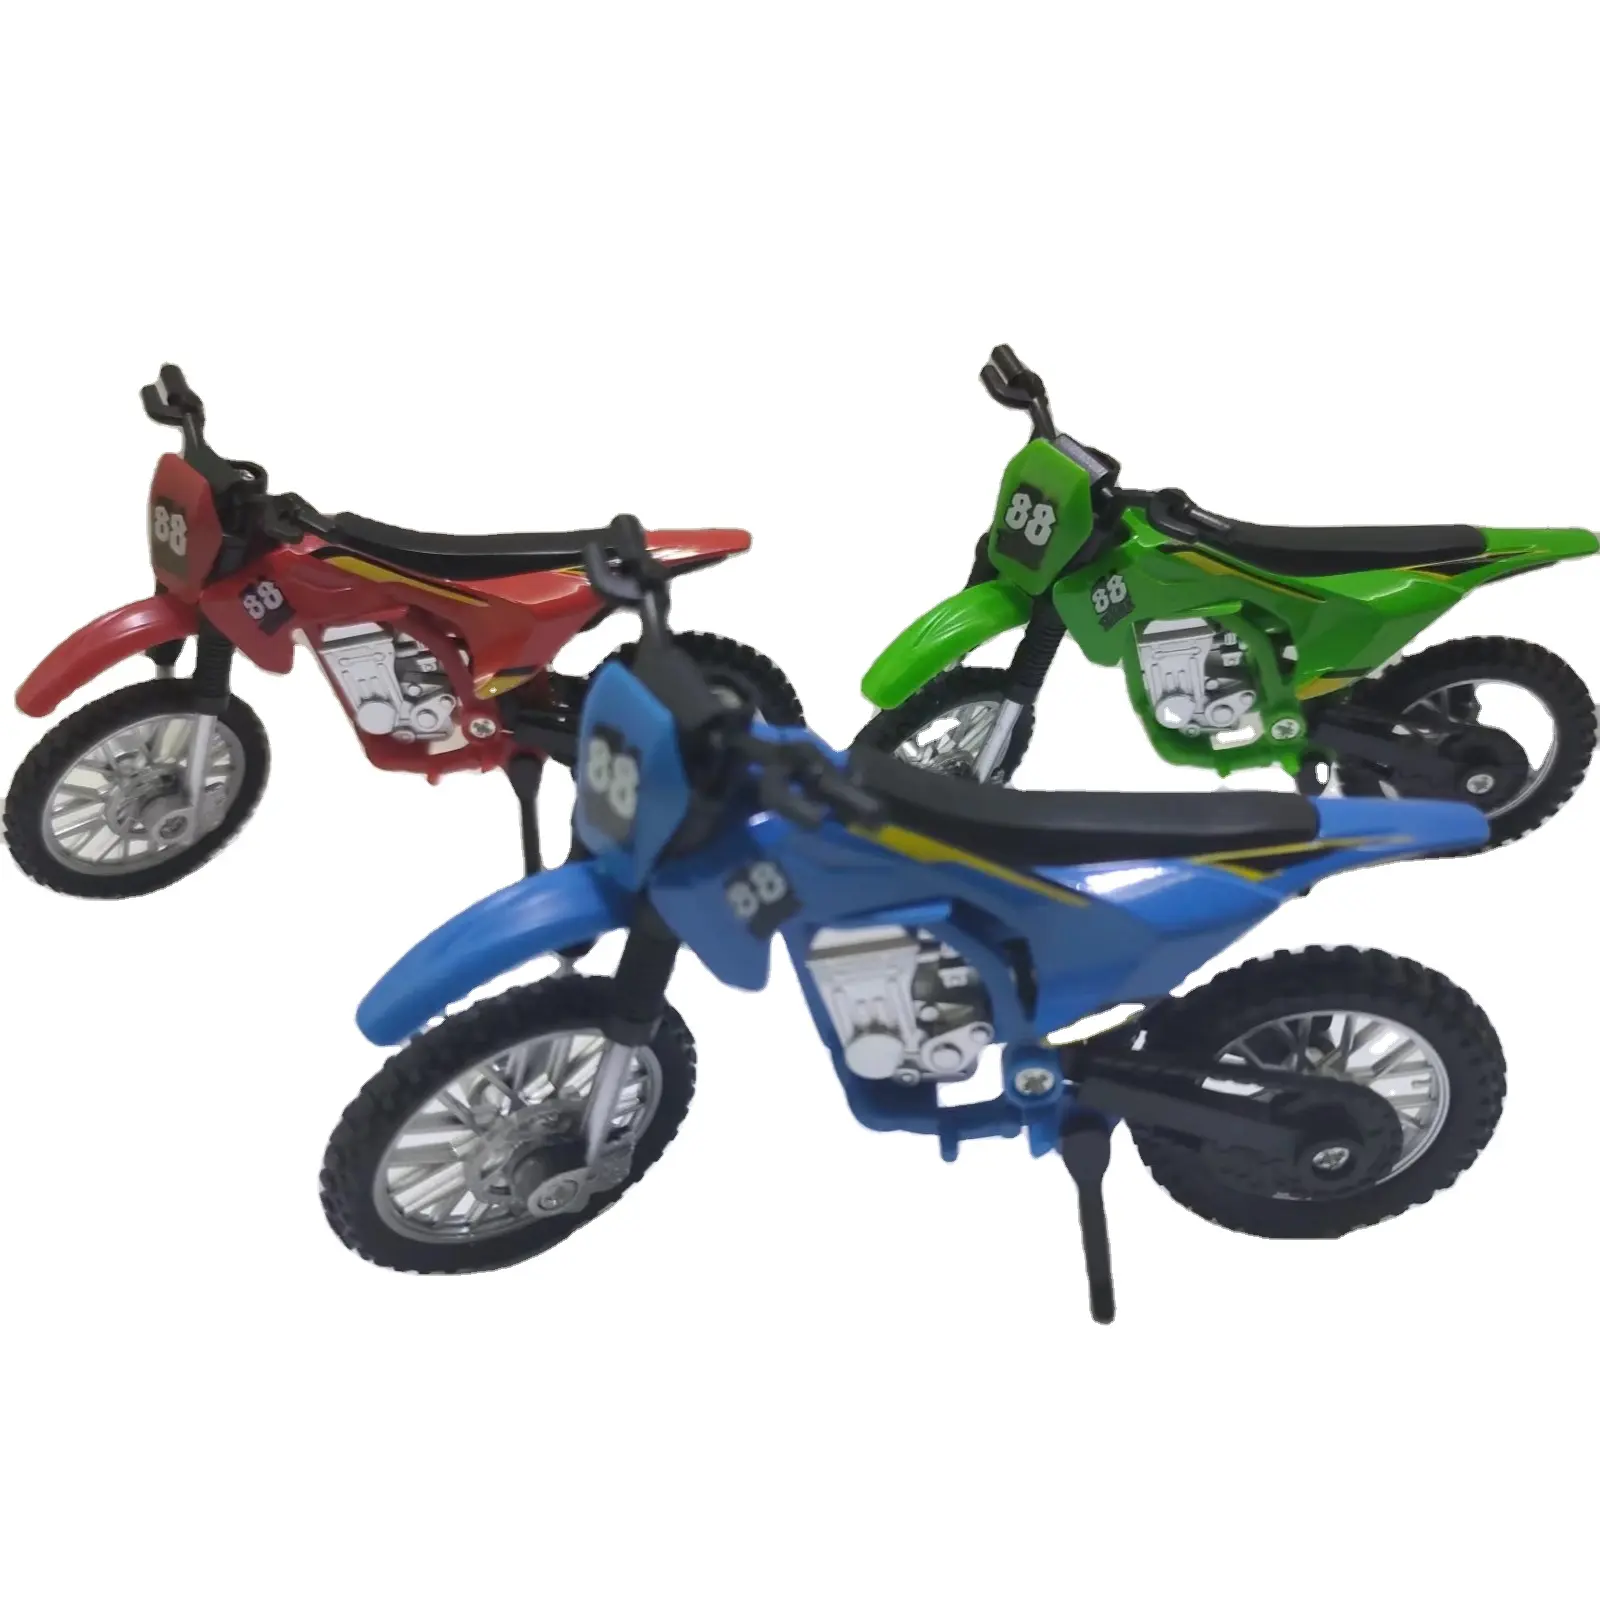 Color Box Motorcycle Engine Assembly Toys 2022 Popular Best Selling Product Model Diecast Motorcycle Metal Car Toys